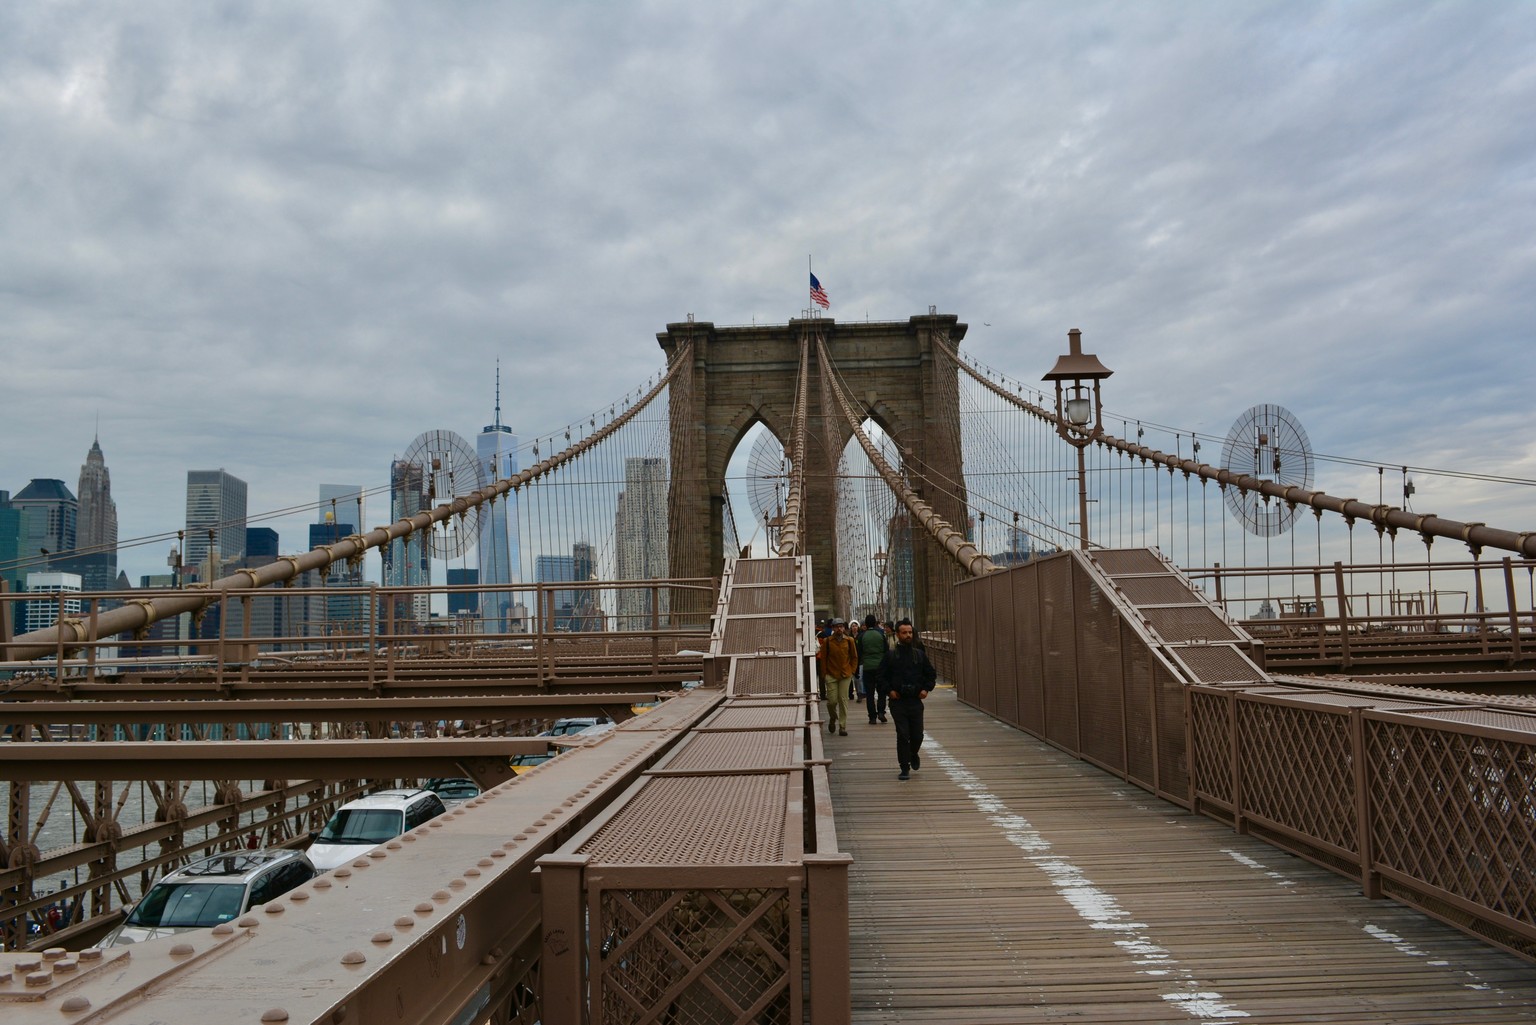 The second tallest building to the left of the bridge is the Woolworth Building, tallest in the world from 1913-1930.